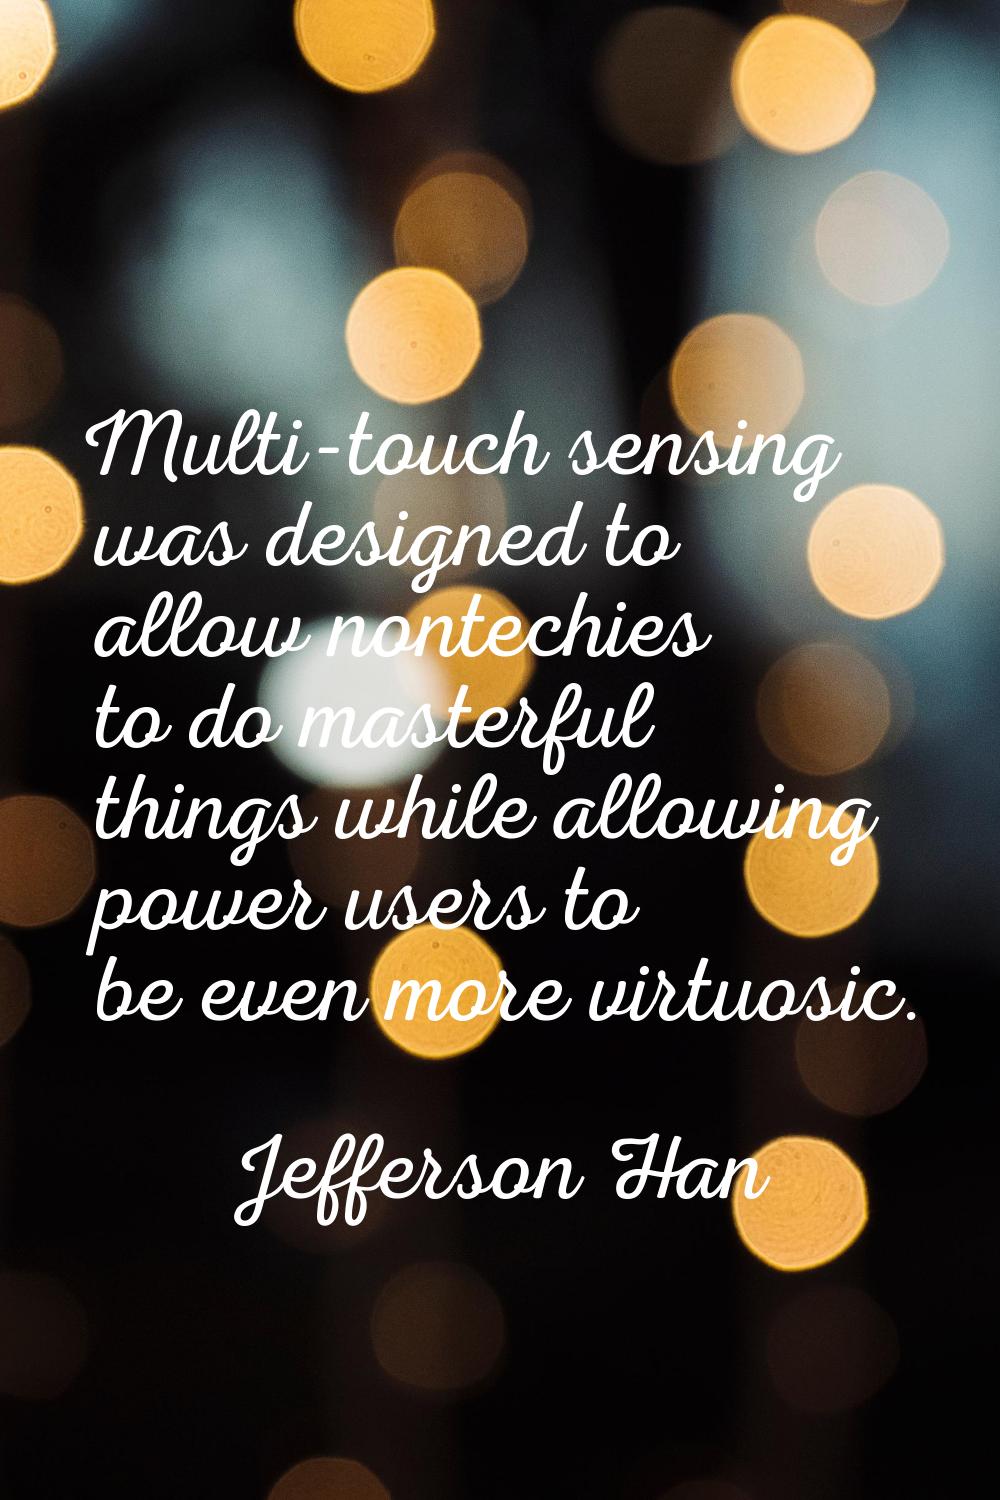 Multi-touch sensing was designed to allow nontechies to do masterful things while allowing power us